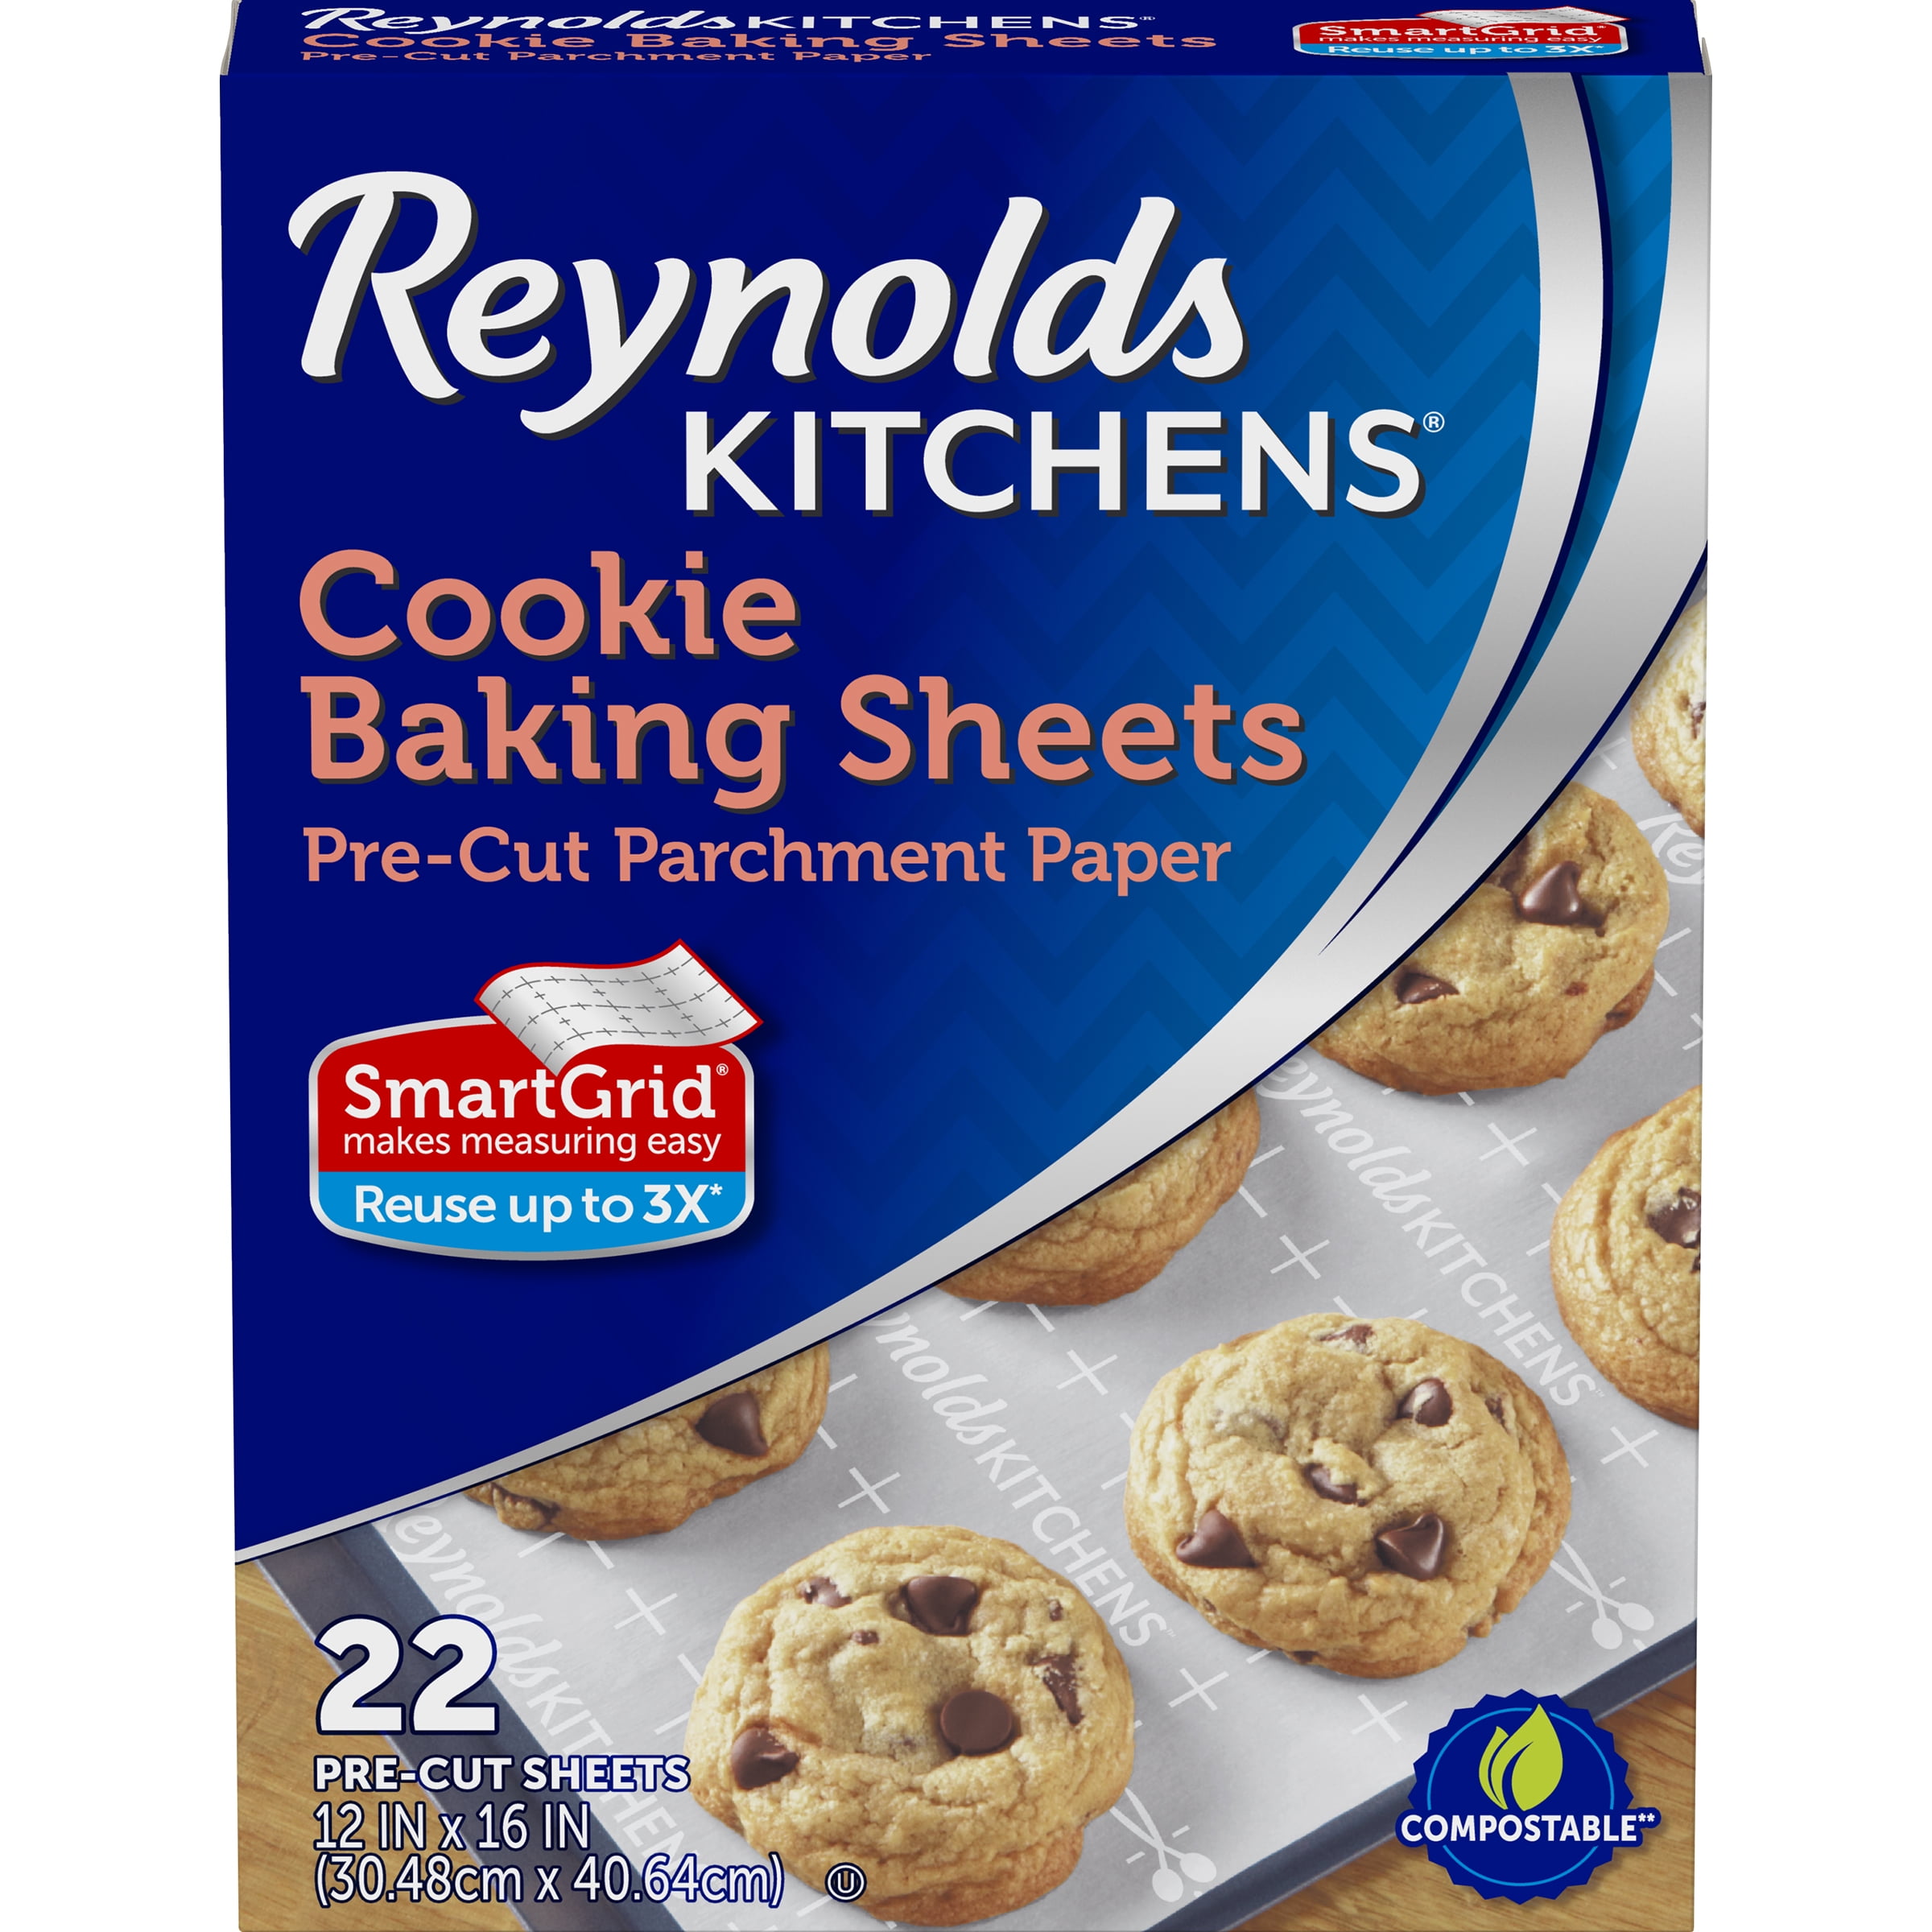 12 Best Baking Sheets to Buy in 2021 - Top-Rated Cookies Sheets